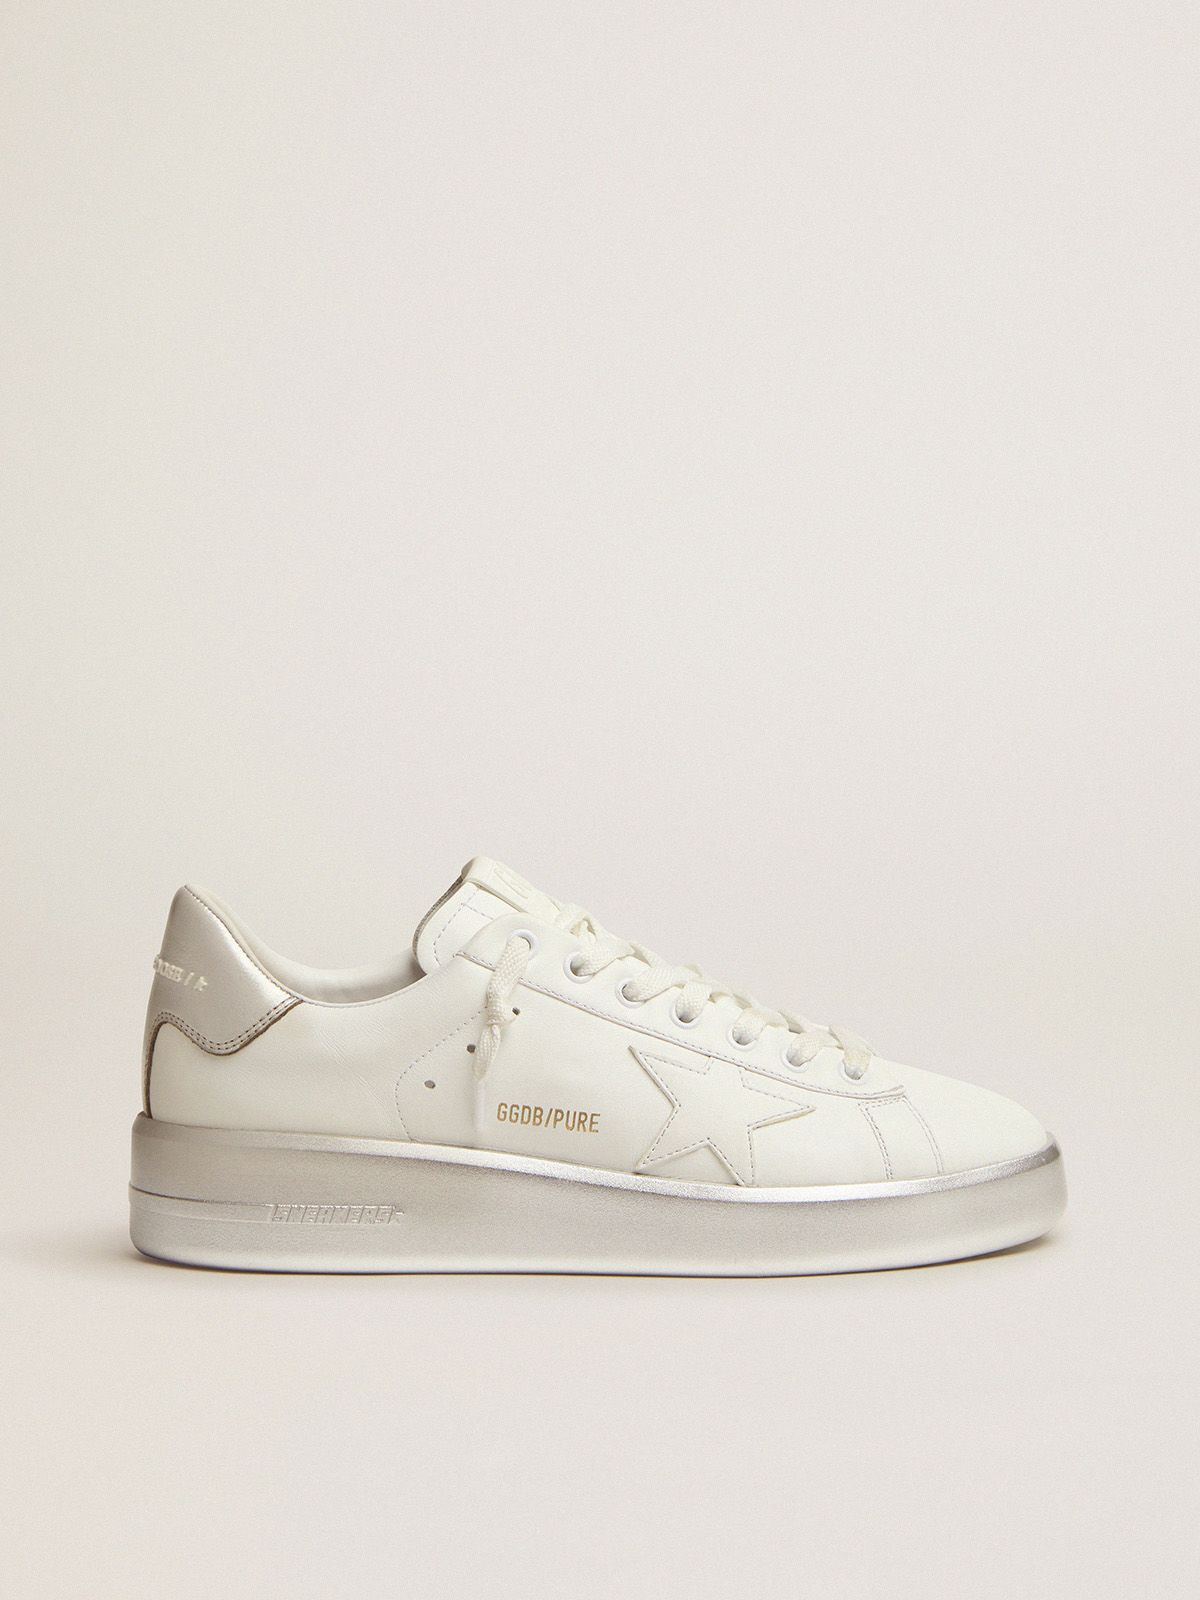 golden goose in with laminated tab and heel white foxing sneakers Purestar silver leather